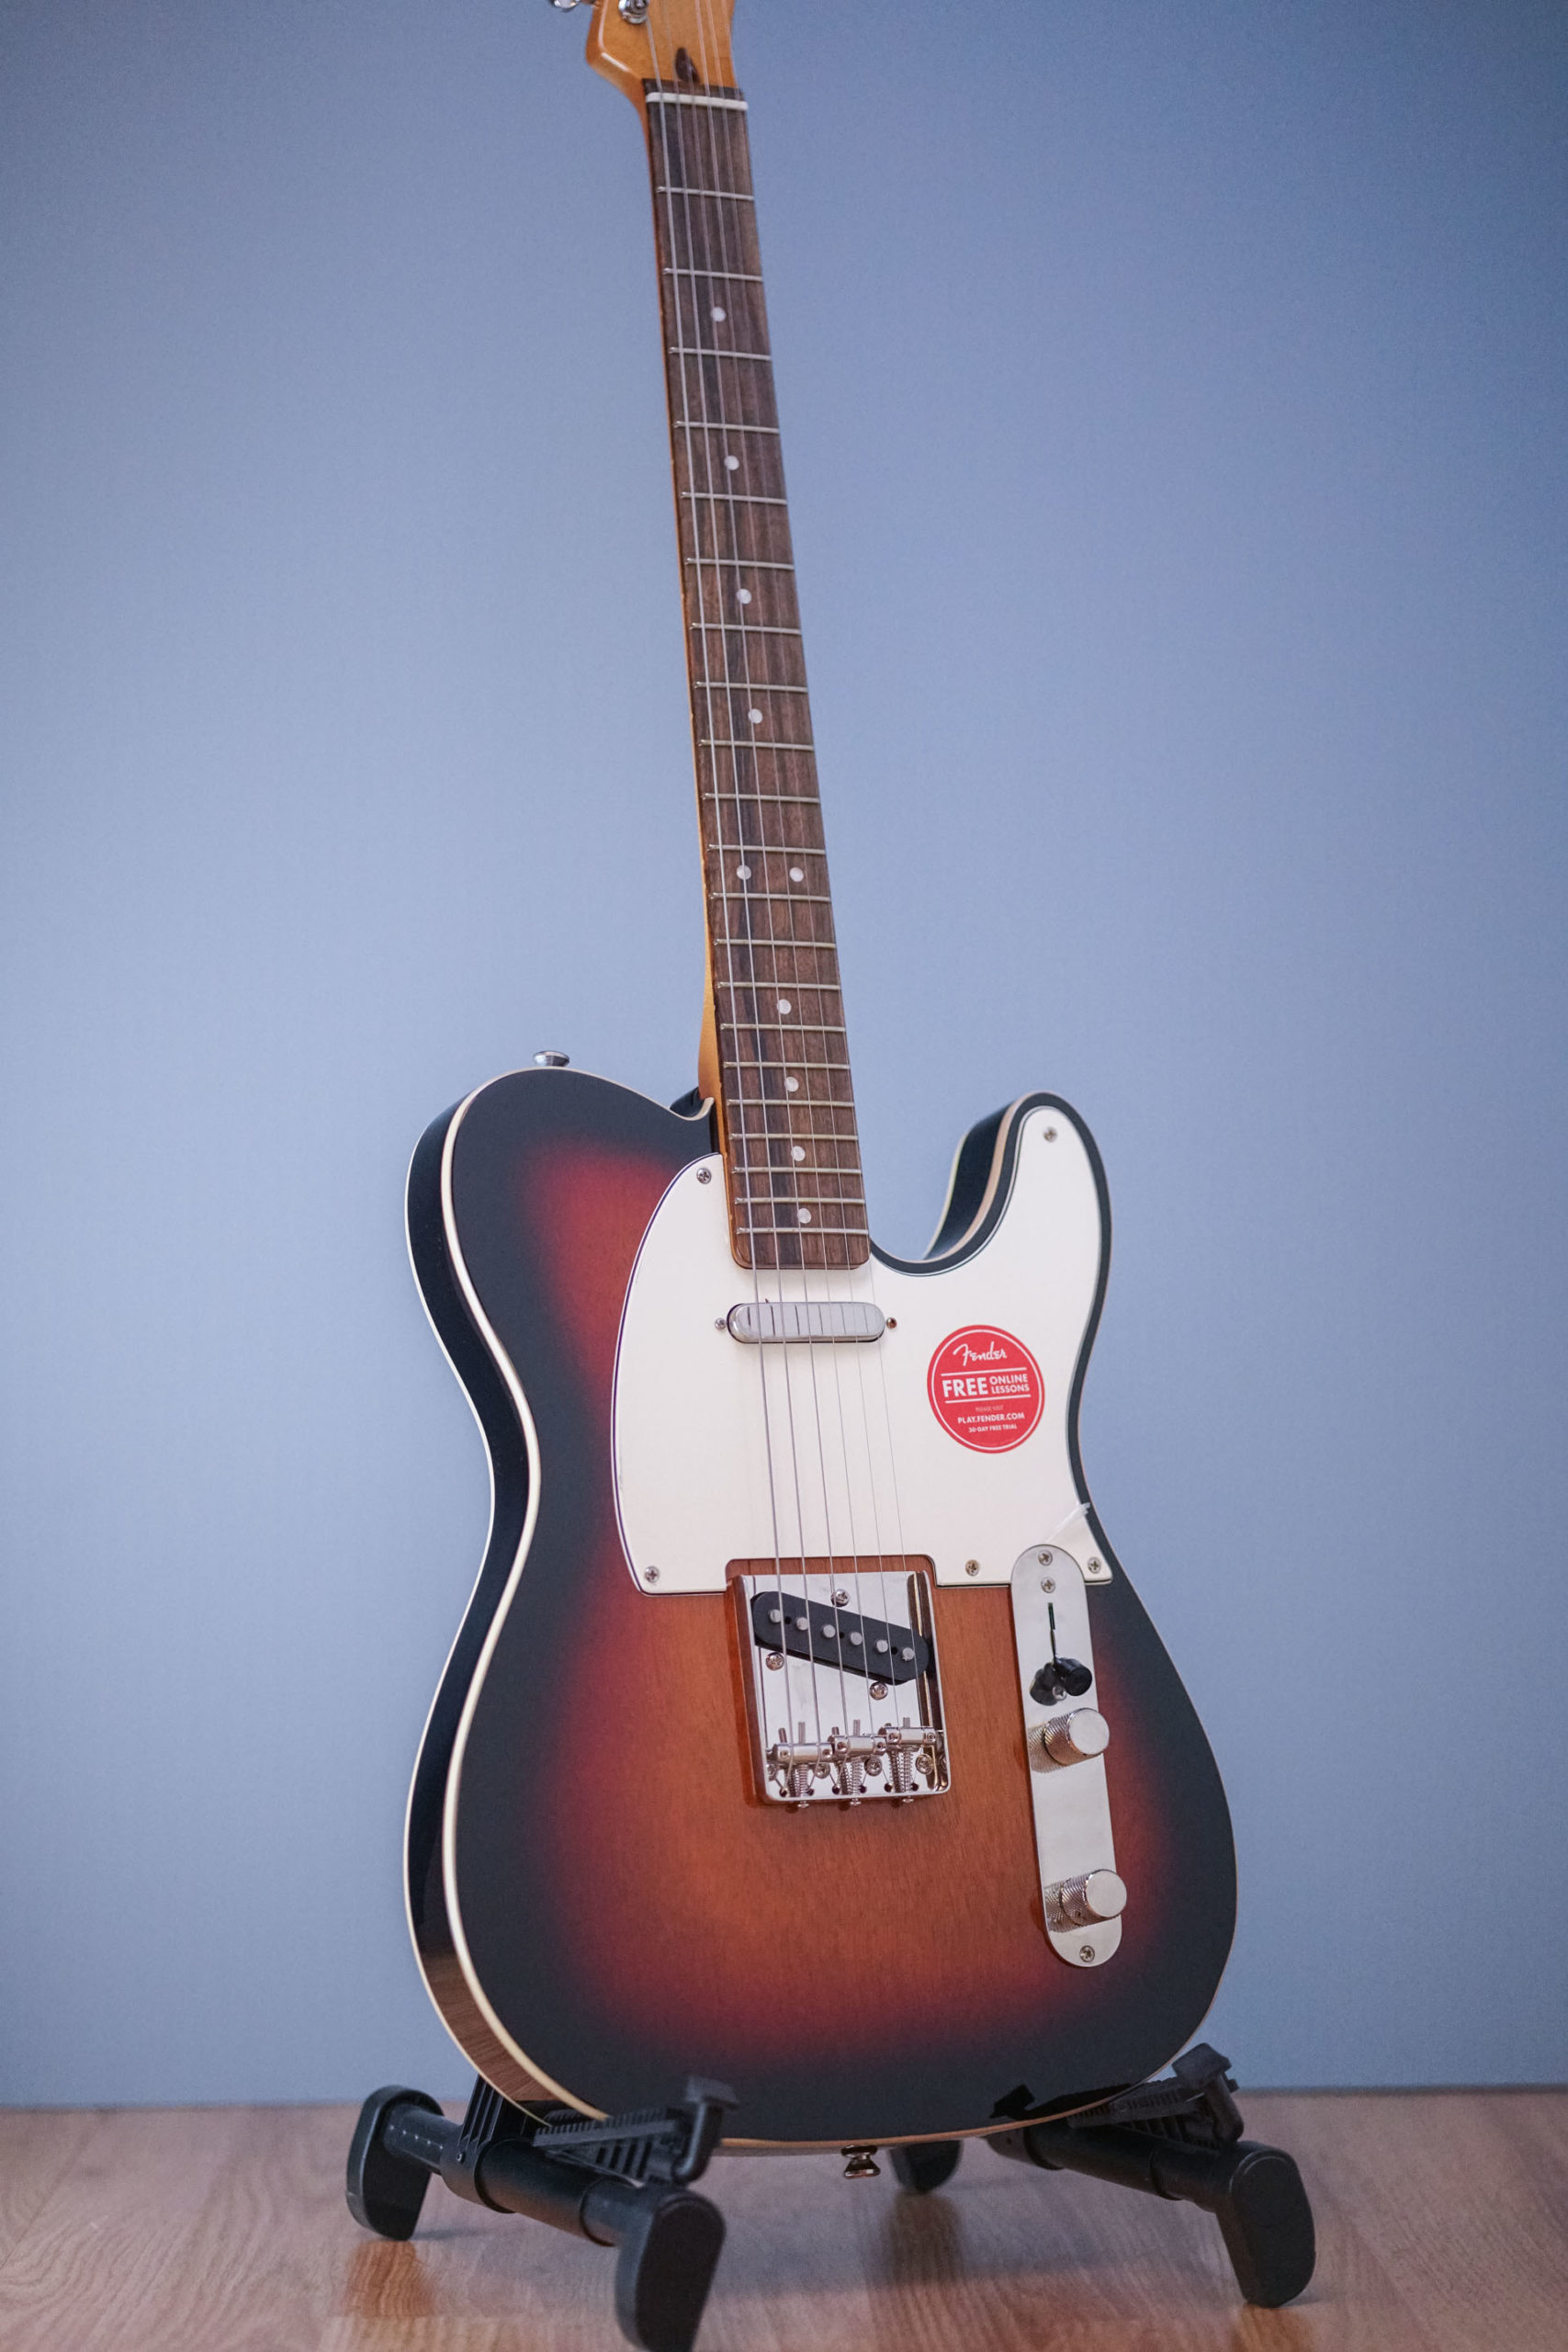 Squier classic vibe Telecaster 60s 【気質アップ】 - ギター